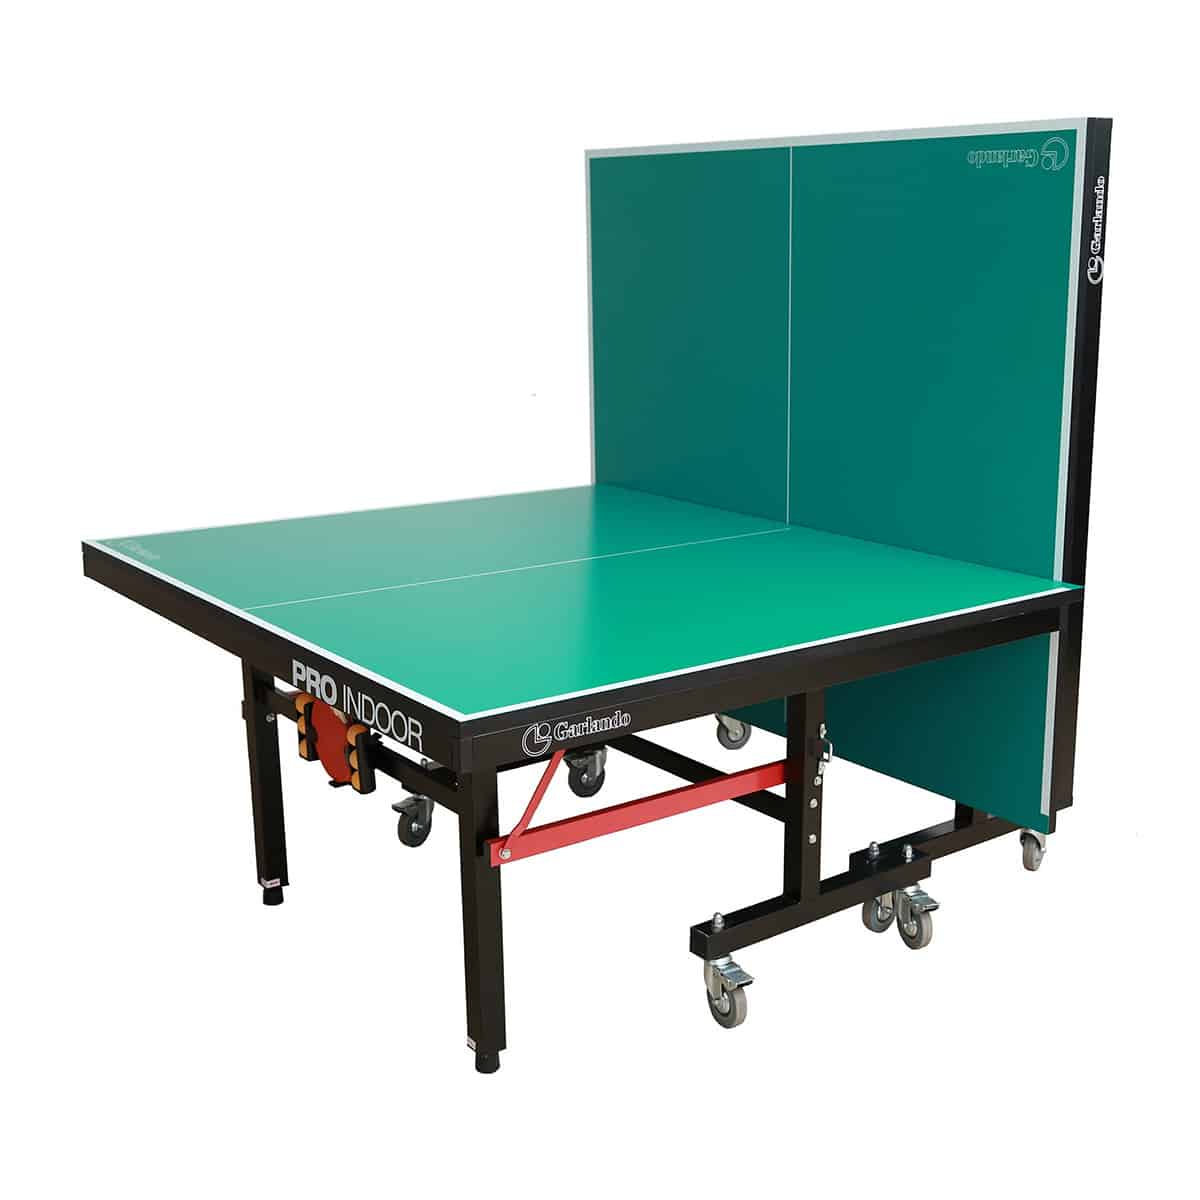 Garlando Universal Table Tennis Replacement Net and Clip-On Post Set 